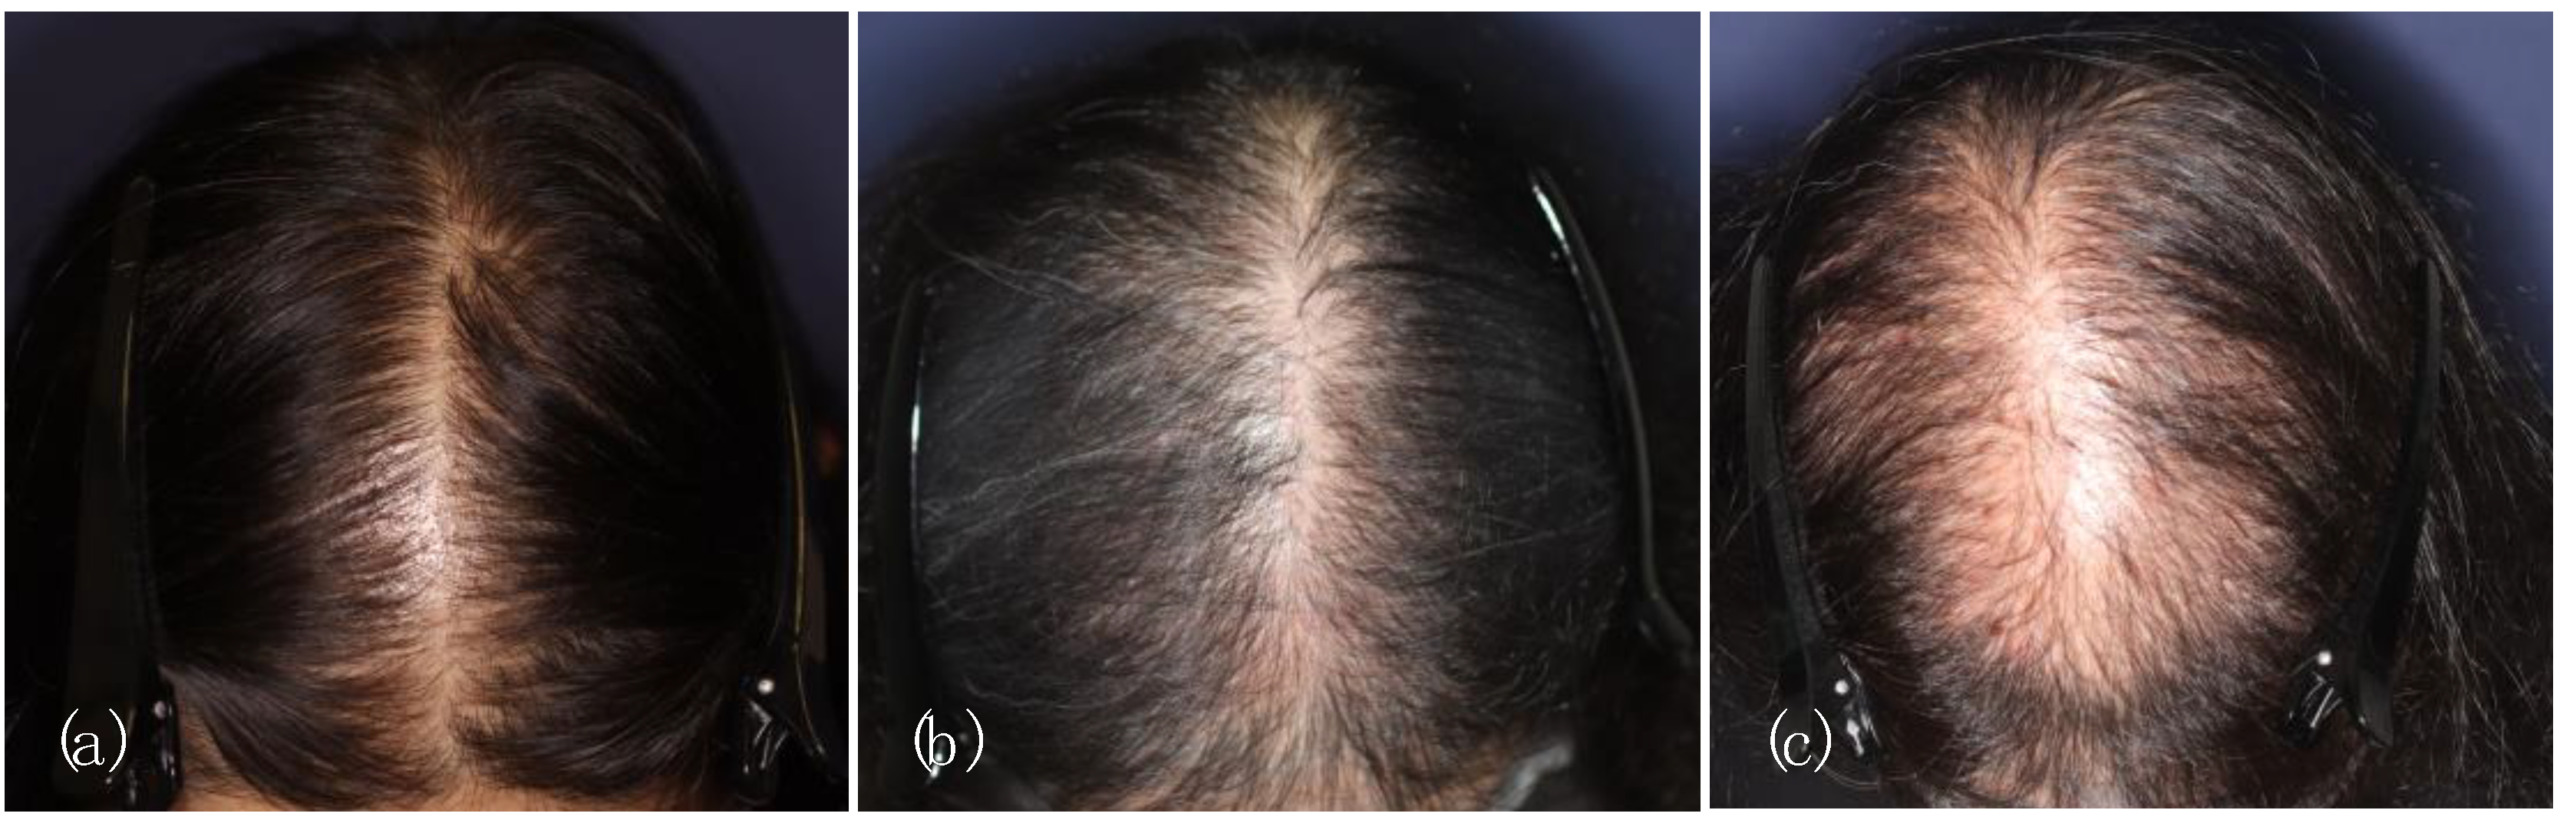 PDF] A new classification of pattern hair loss that is universal for men  and women: basic and specific (BASP) classification. | Semantic Scholar